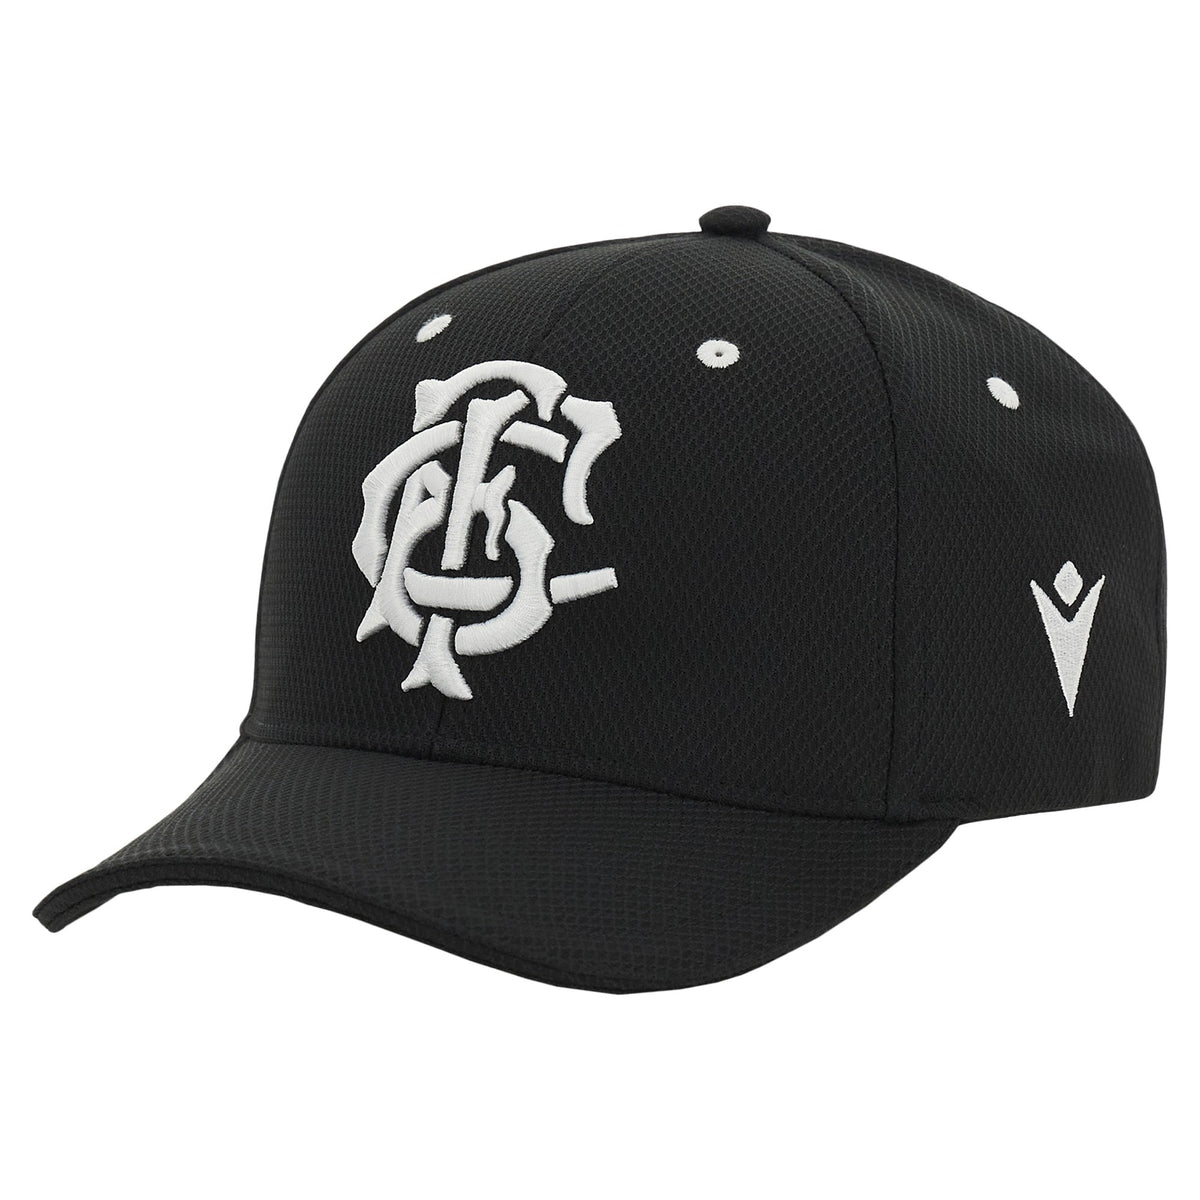 Macron Barbarians Rugby Cap 23/24 |Cap | Macron Barbarians | Absolute Rugby